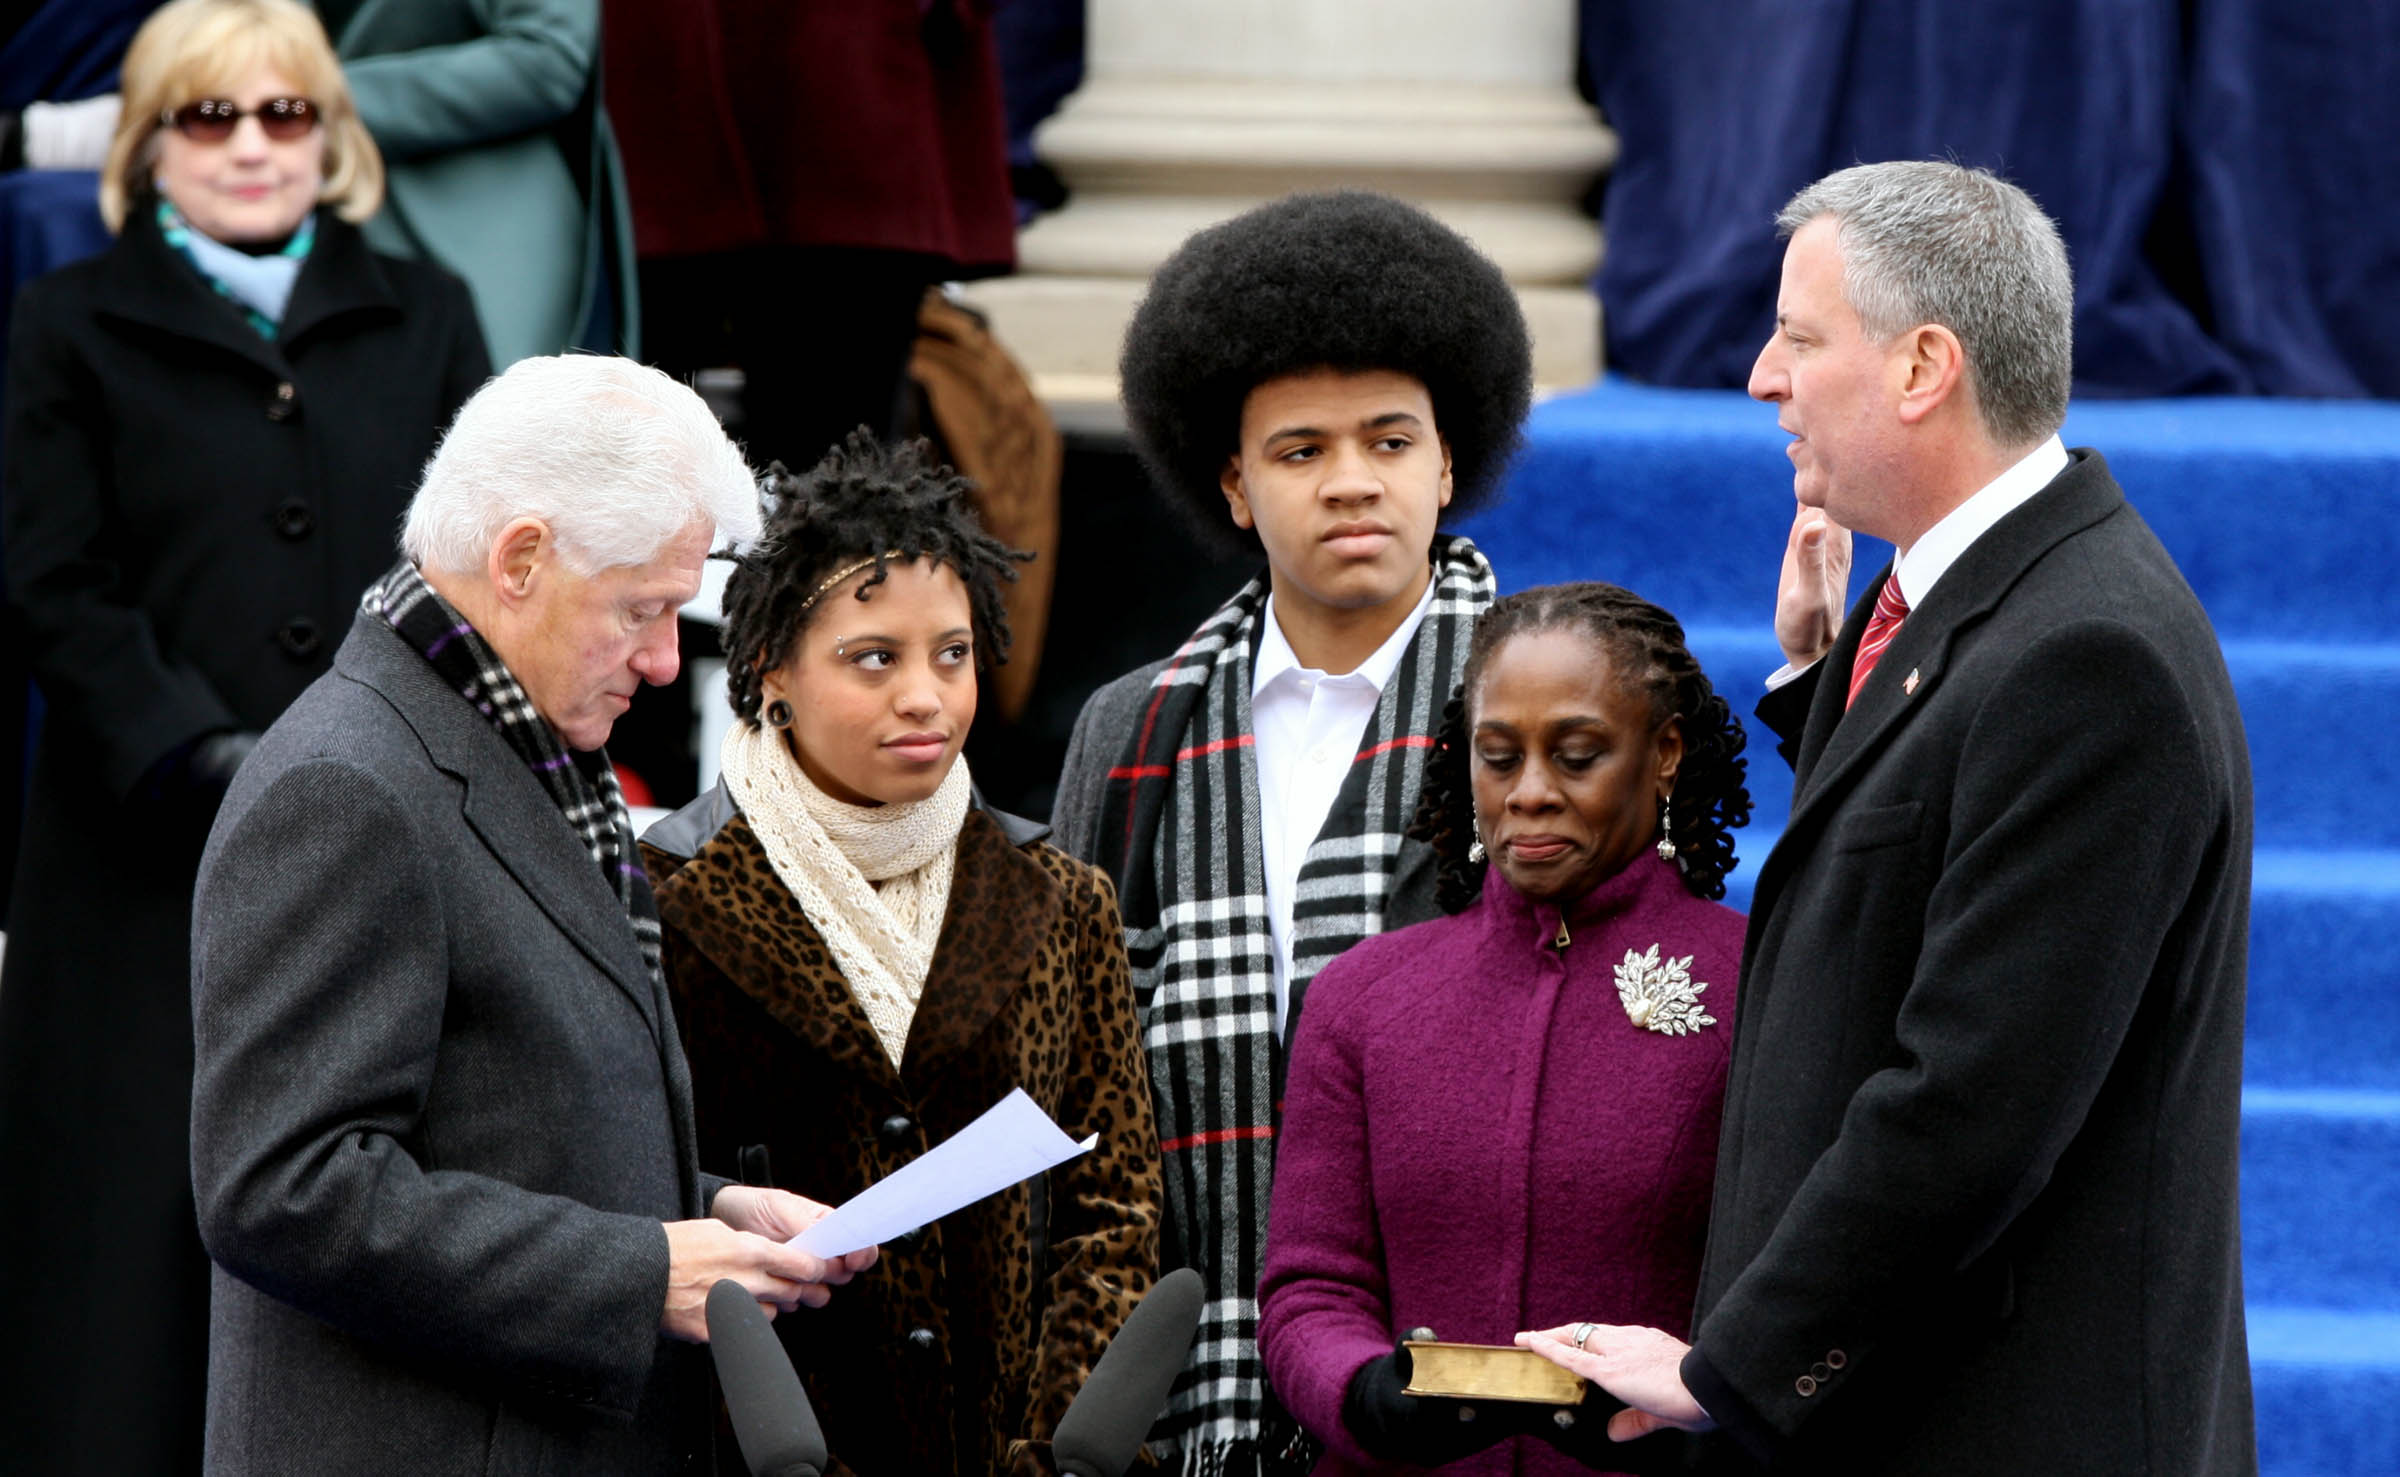 Bill de Blasio (right) is sworn in as New York's 109th mayor by former President Bill Clinton (left) at City Hall on Wednesday. Photo: Xinhua